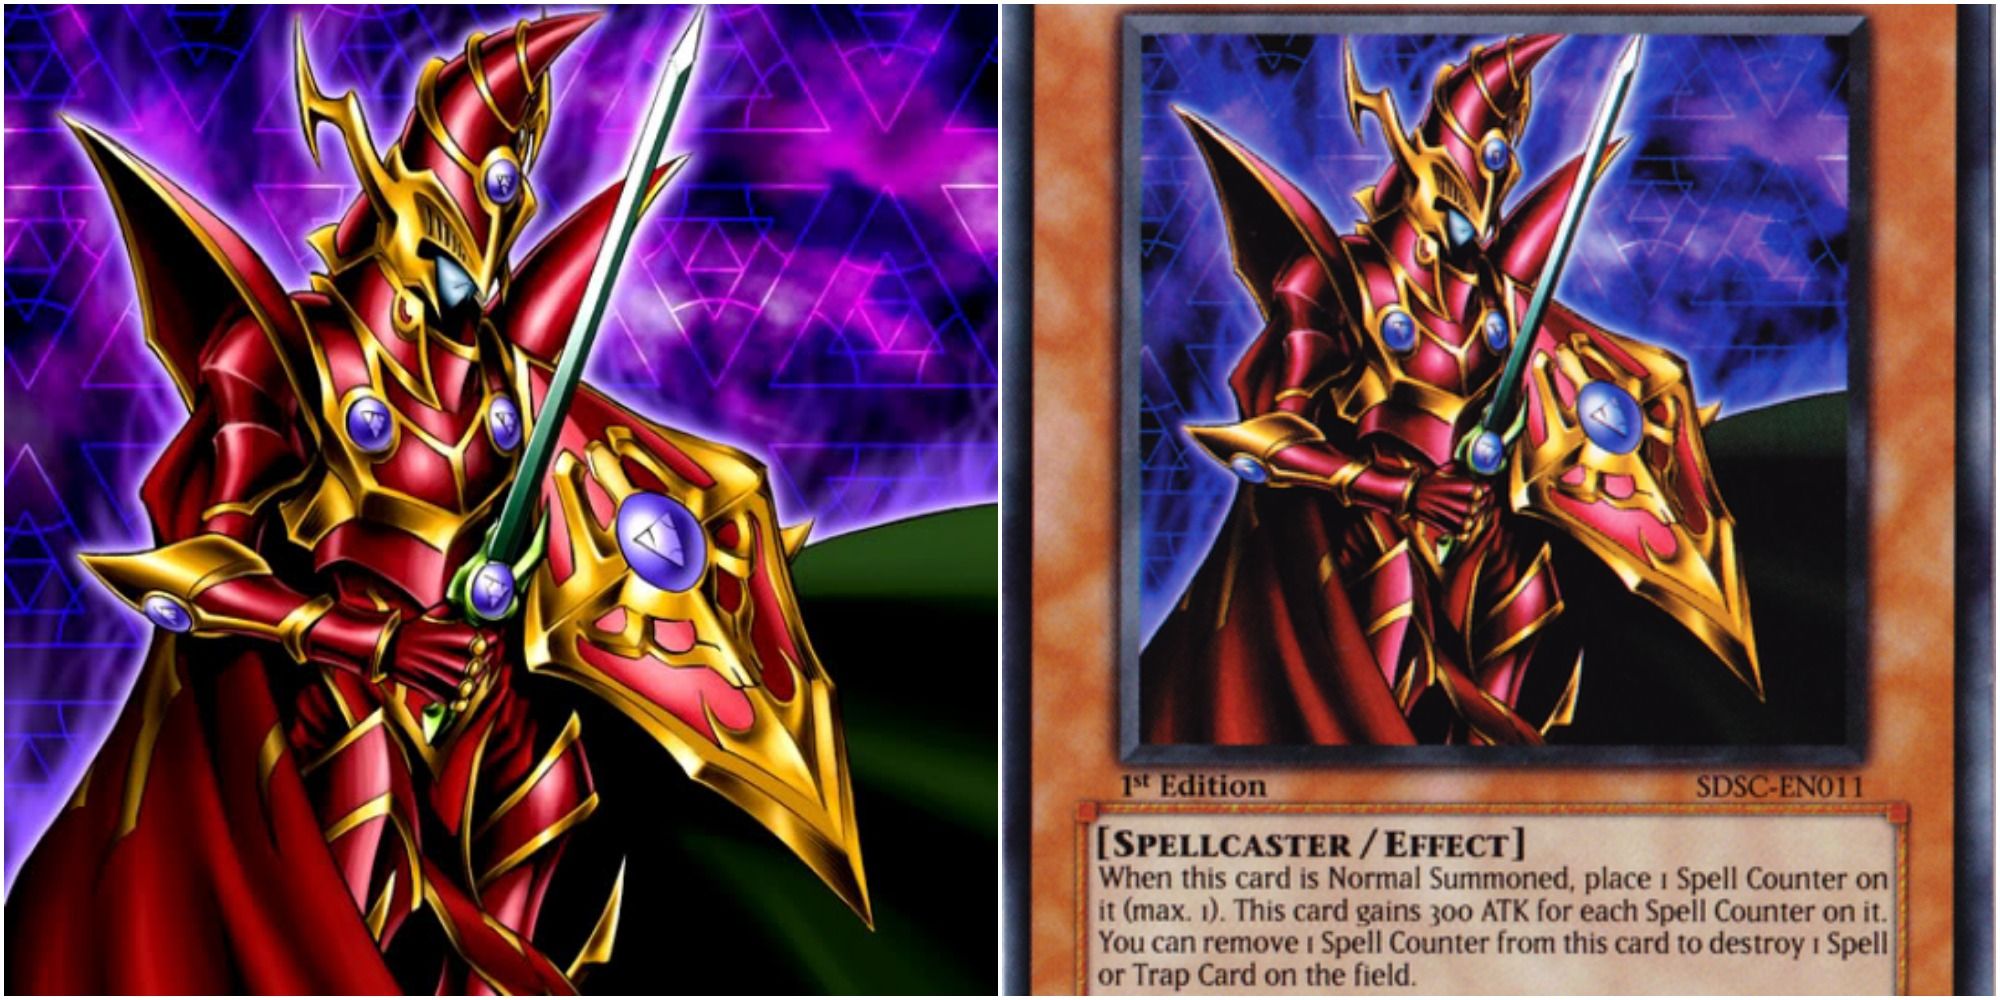 breaker the magical warrior card art and text